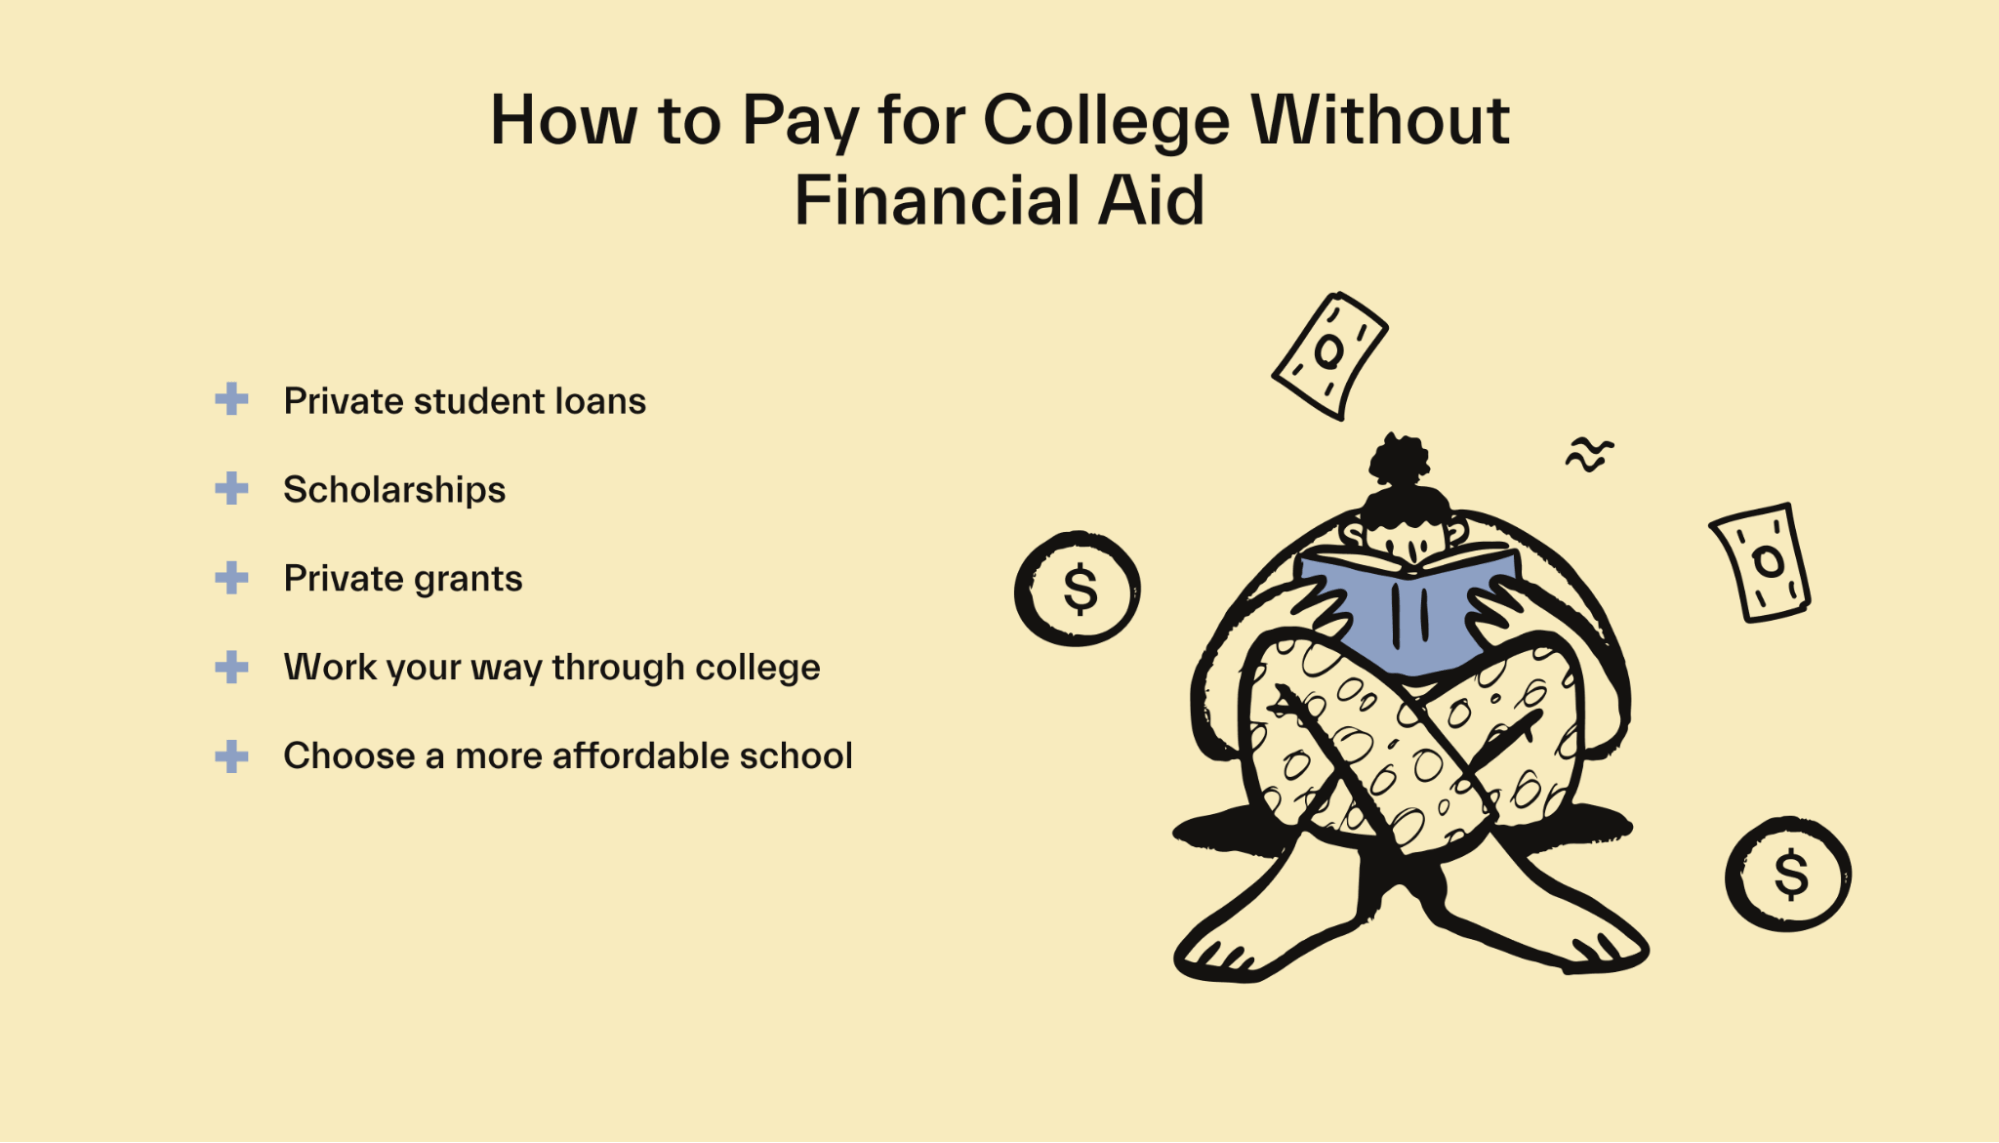 How to Pay for College Without Financial Aid